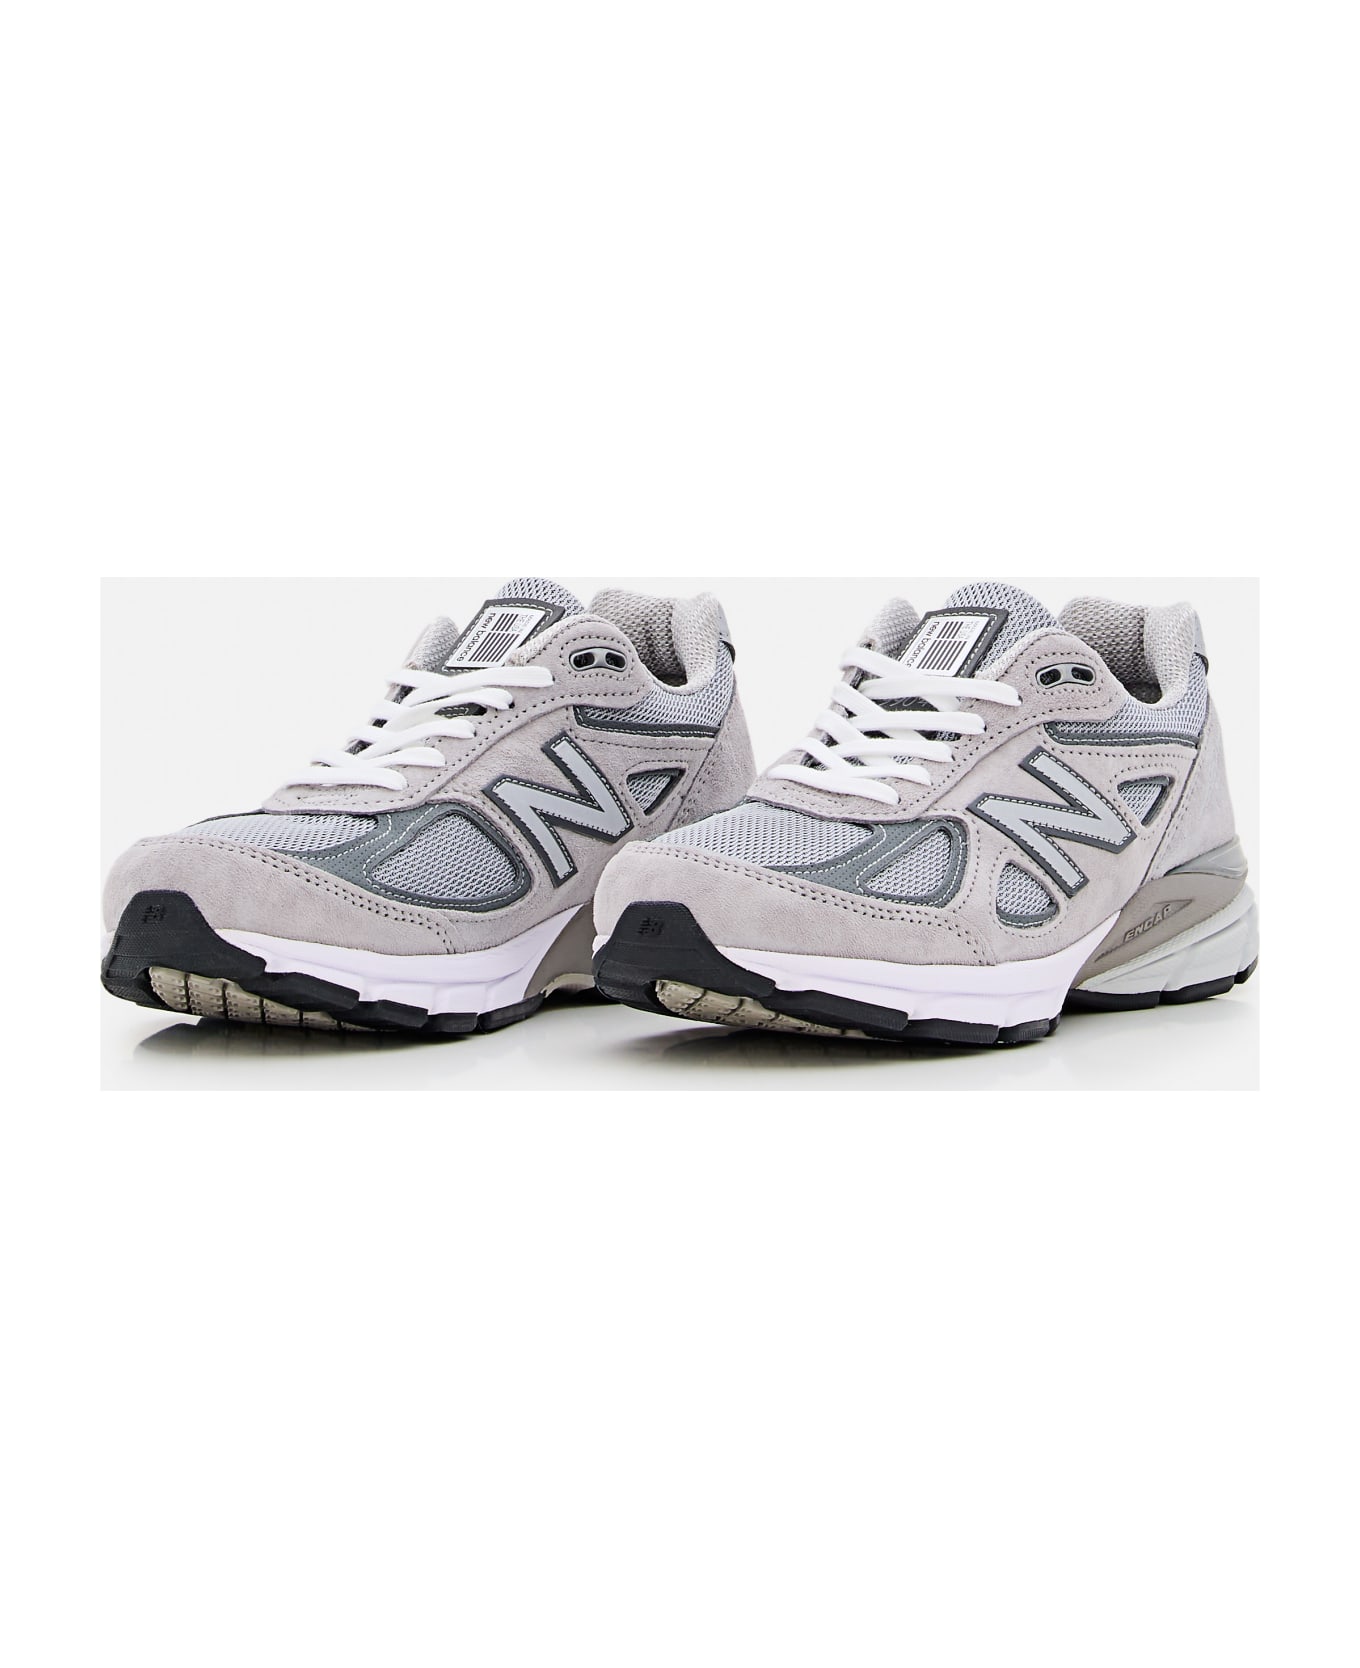 New Balance 990gr4 Leather Snerakers - Grey